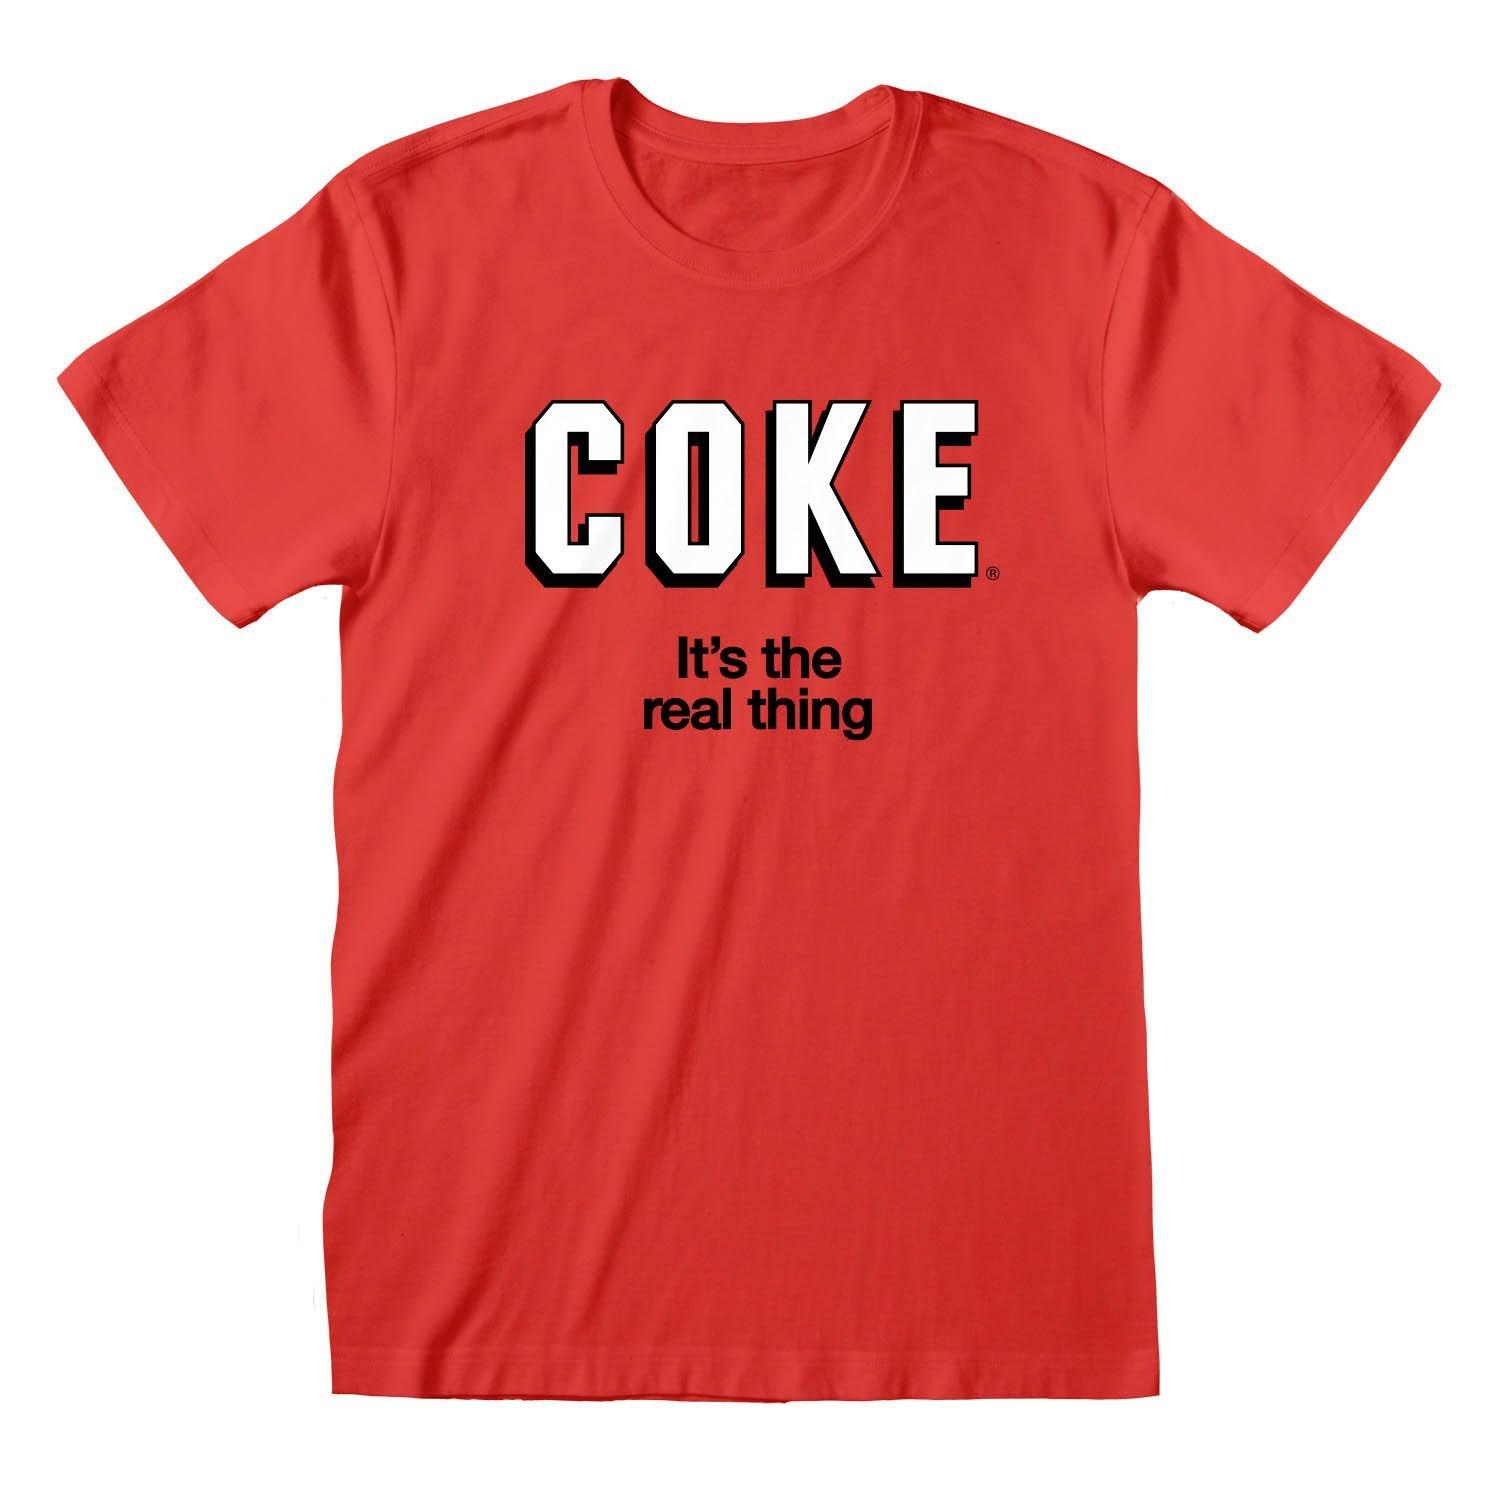 Image of Coca-Cola It's The Real Thing TShirt - M